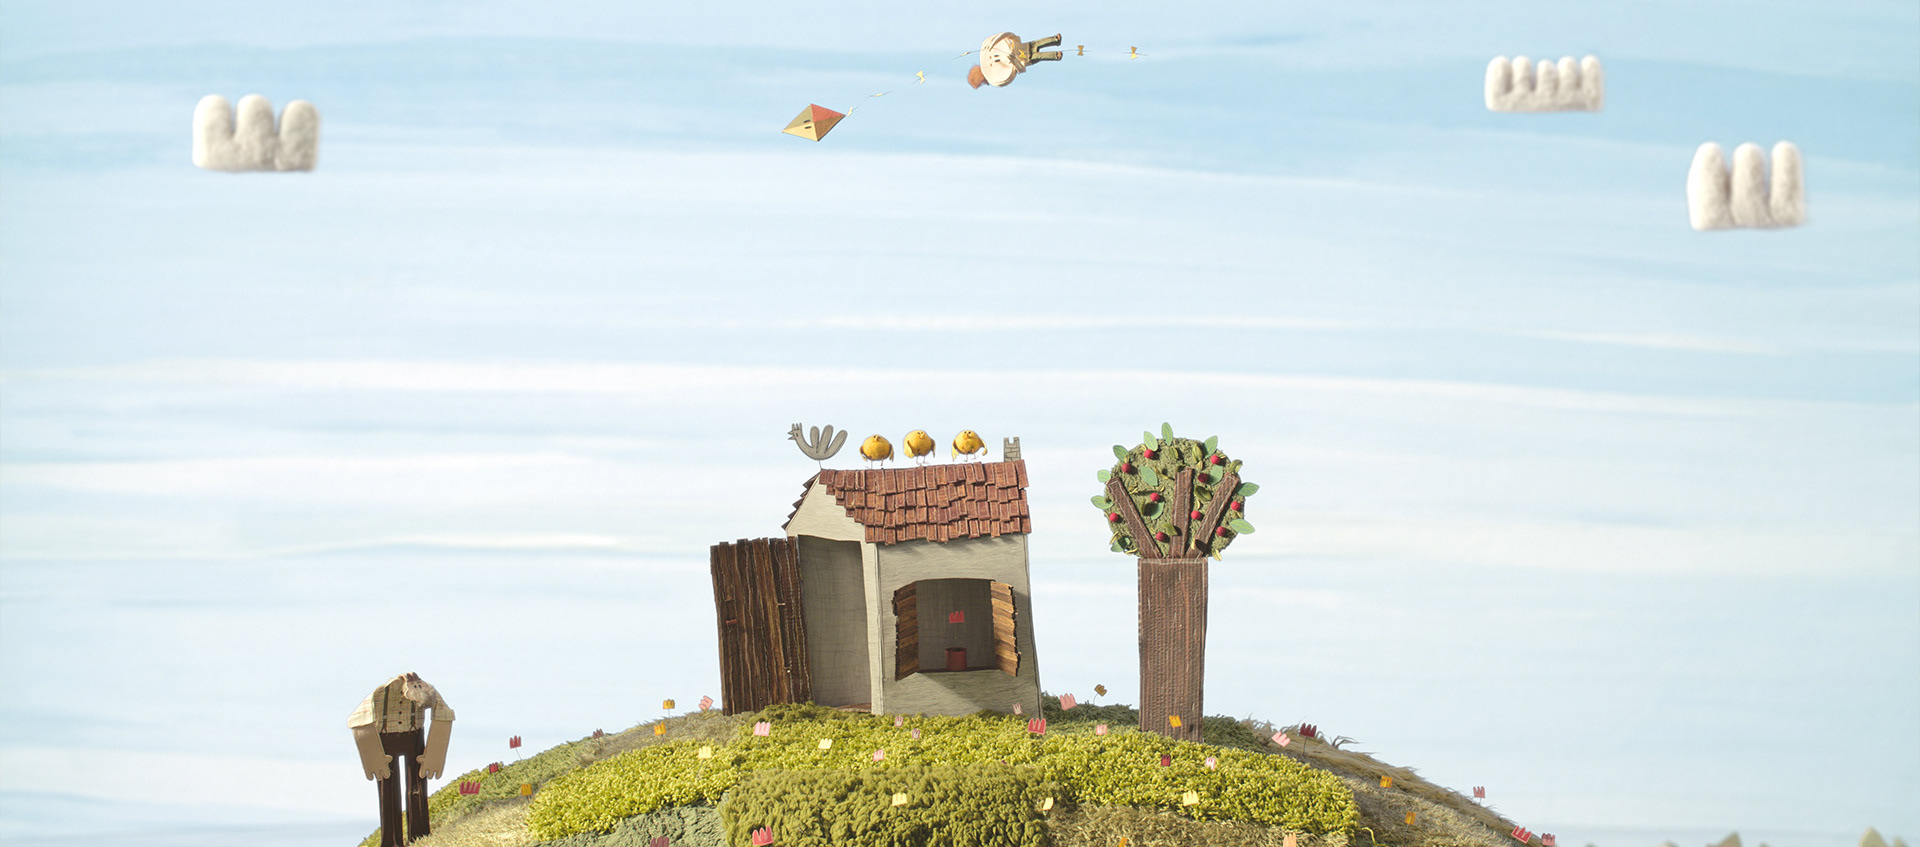 Scene of a boy flying over a small house like a kite as a man on the ground watches, from the animated film The Kite